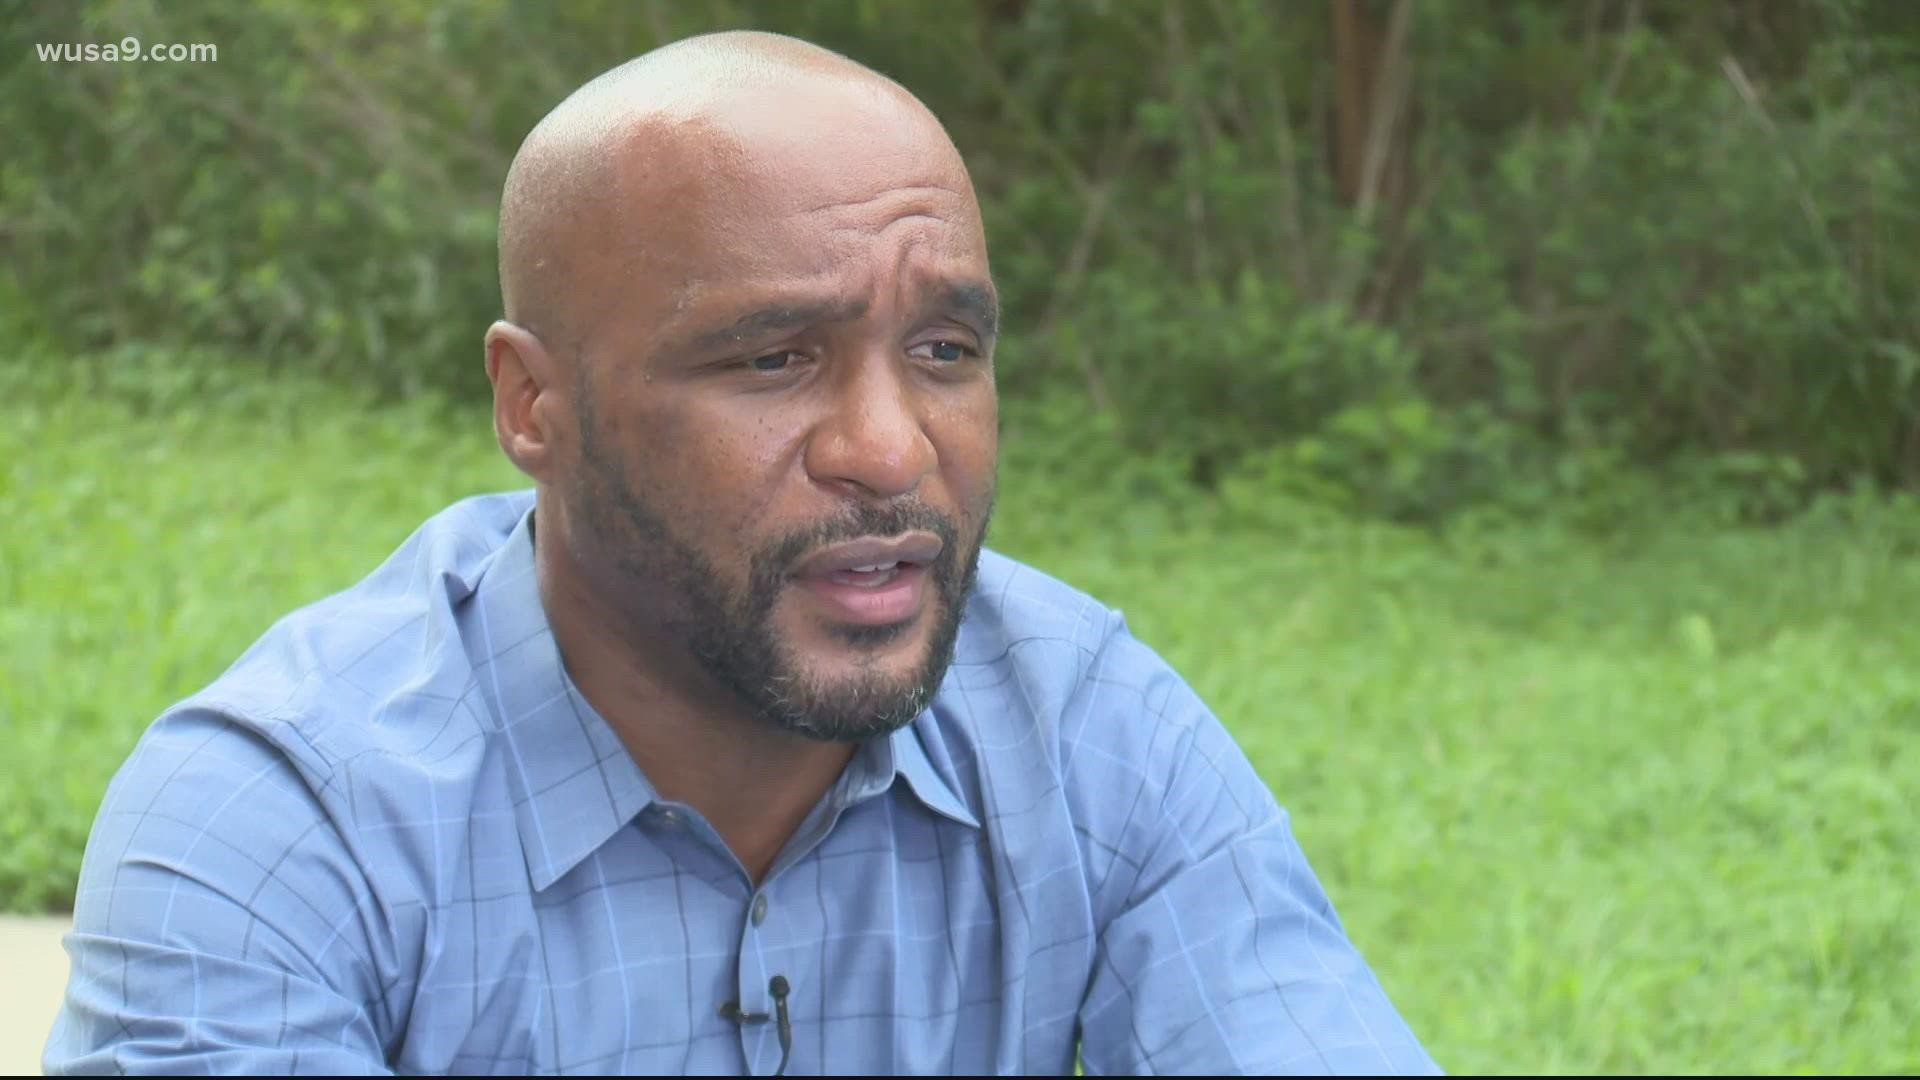 “Quite frankly it was disgusting," Gayles recalled looking back on the dozens of attack messages he says he recieved.